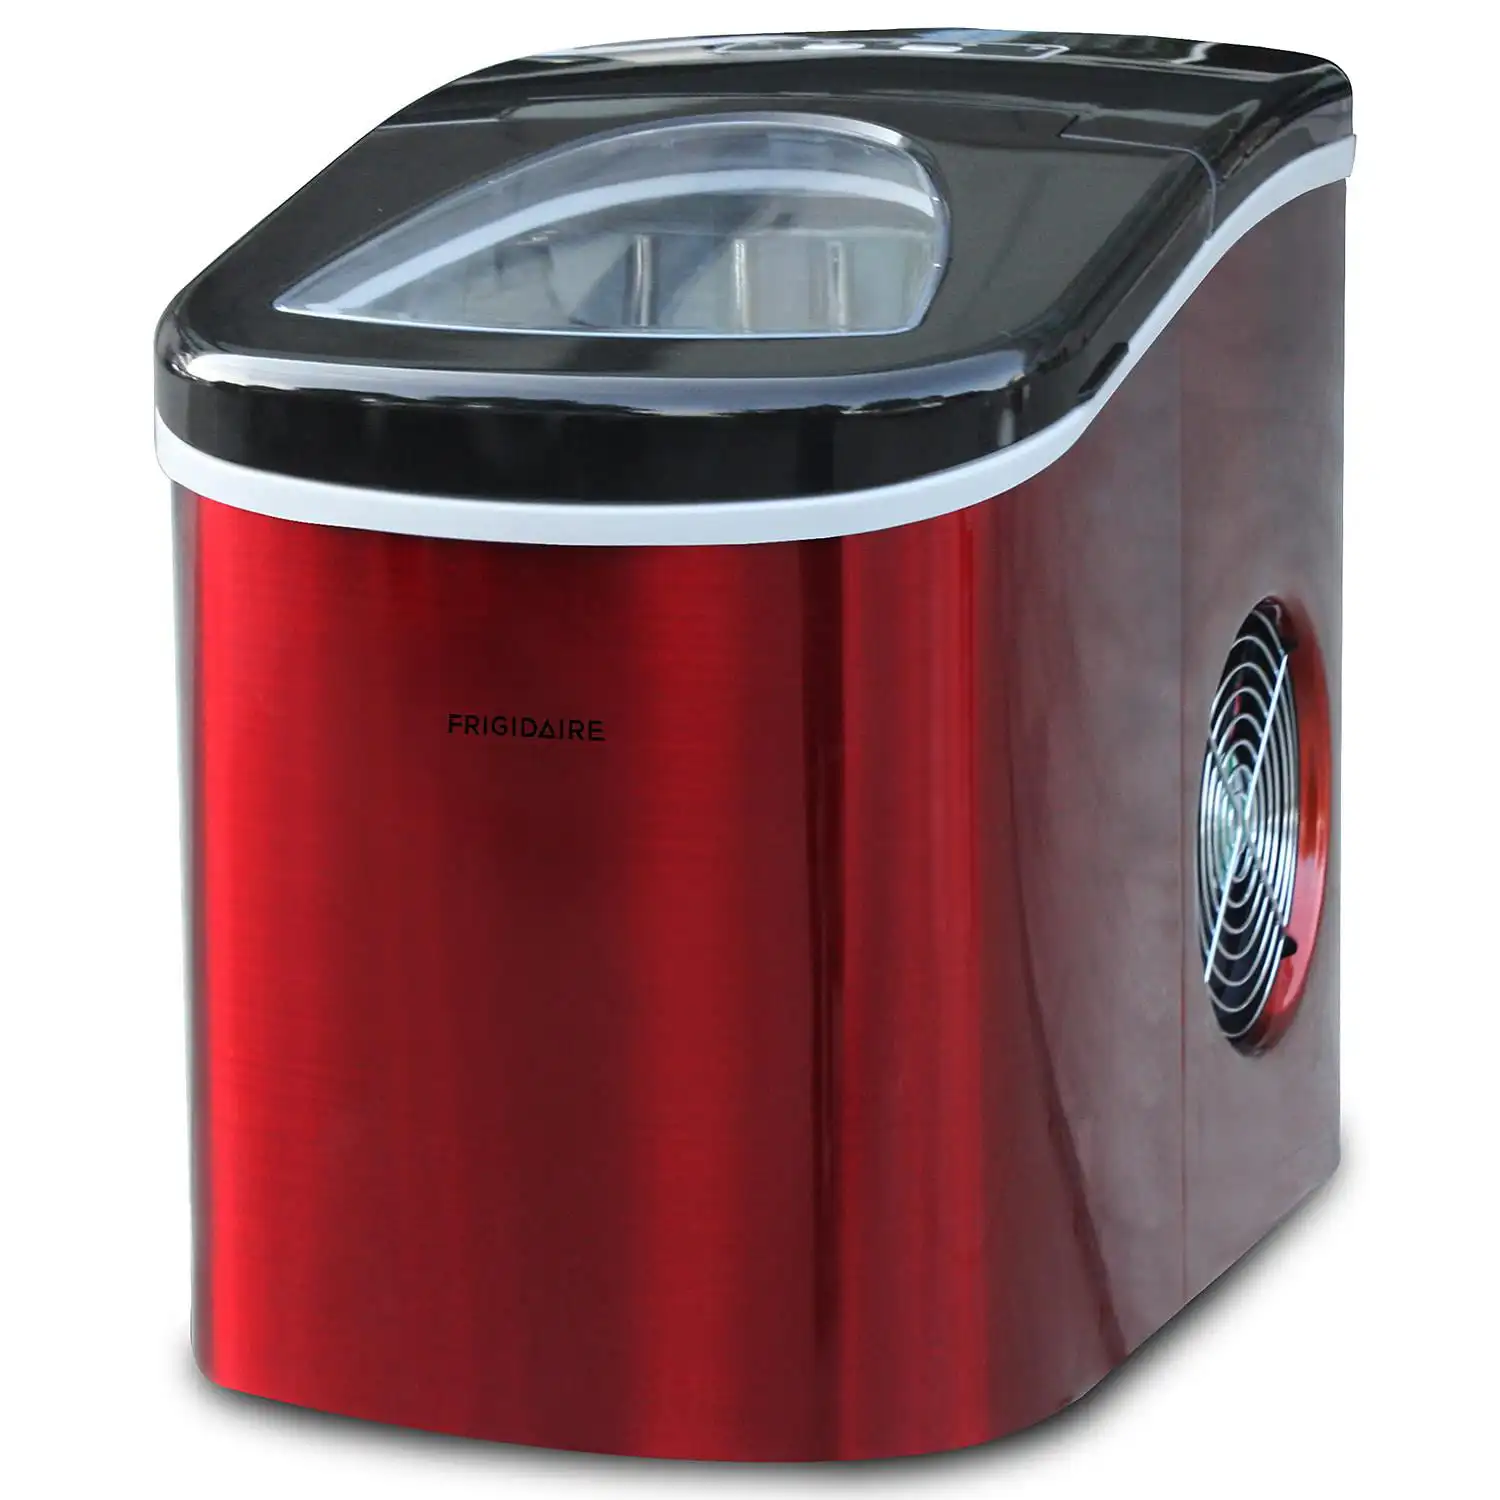 

Frigidaire 26 lb. Countertop Ice Maker EFIC117-SS, Red Stainless Steel